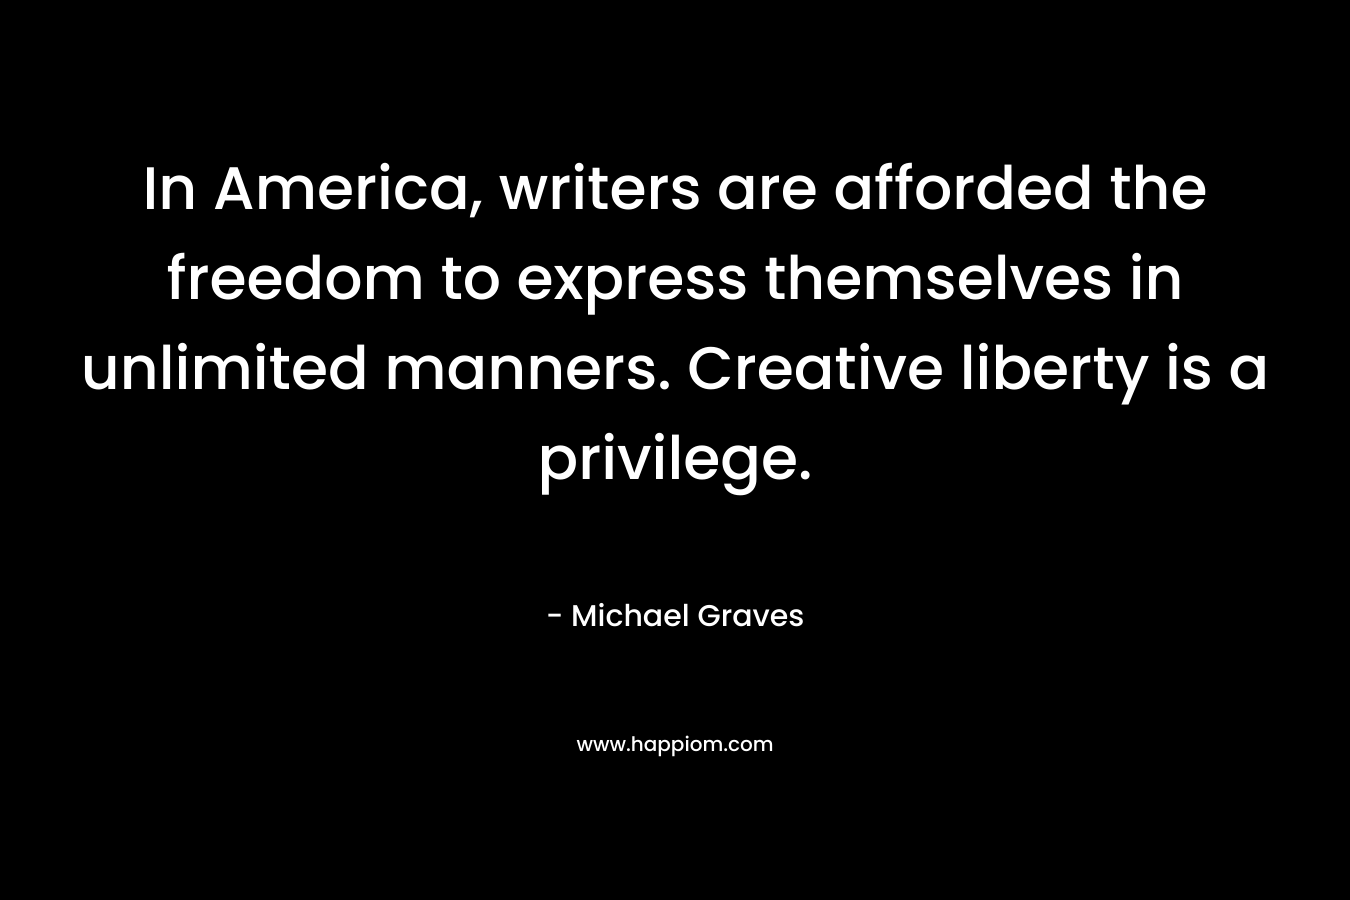 In America, writers are afforded the freedom to express themselves in unlimited manners. Creative liberty is a privilege. – Michael Graves